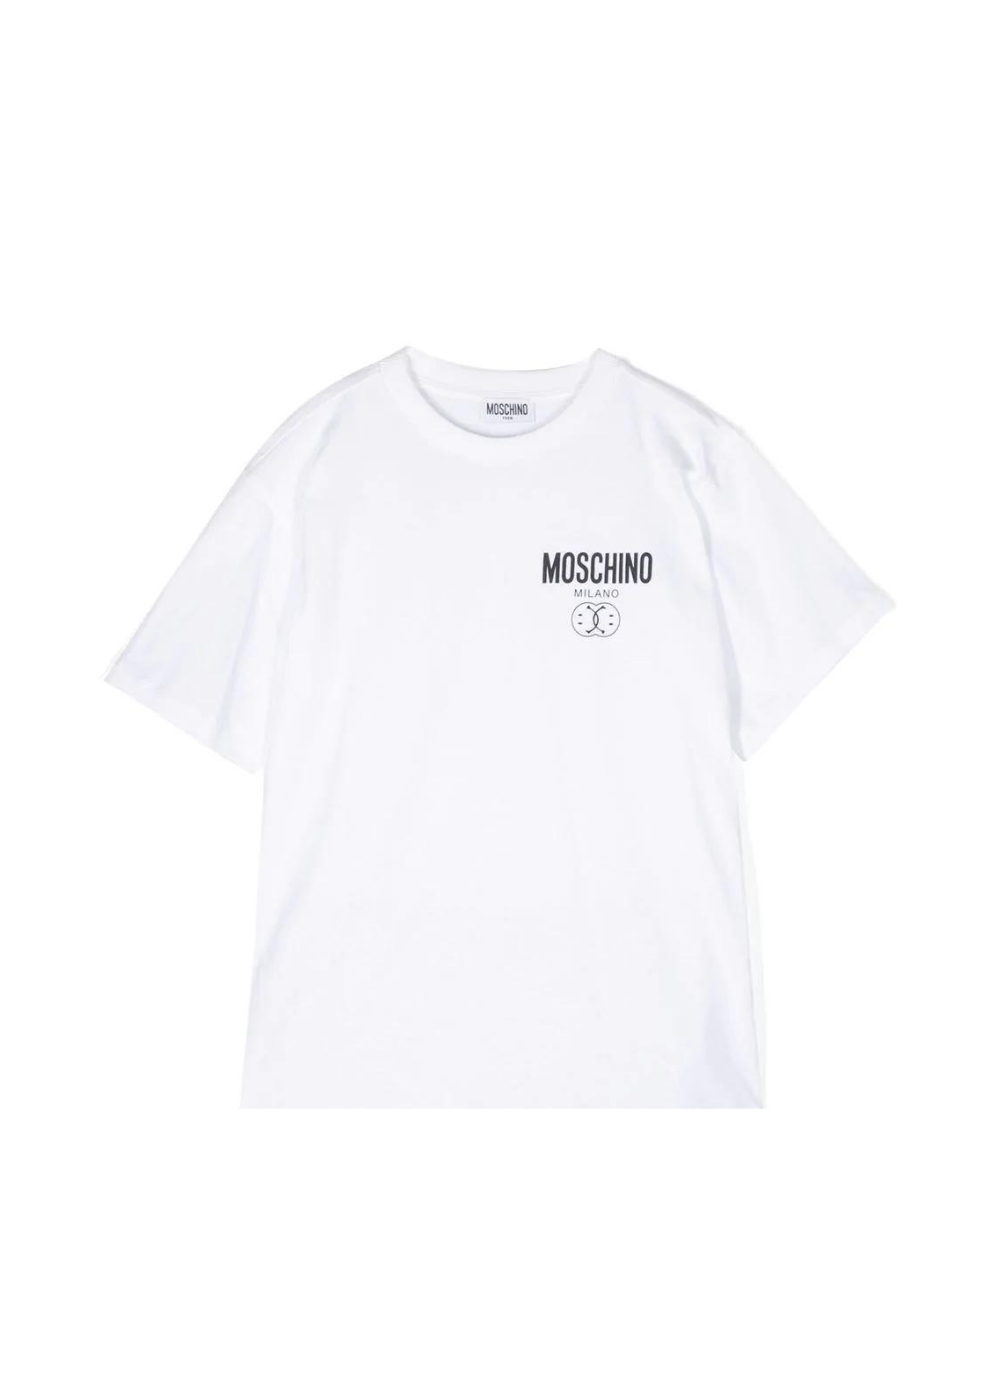 Featured image for “Moschino T-shirt Logo Smile”